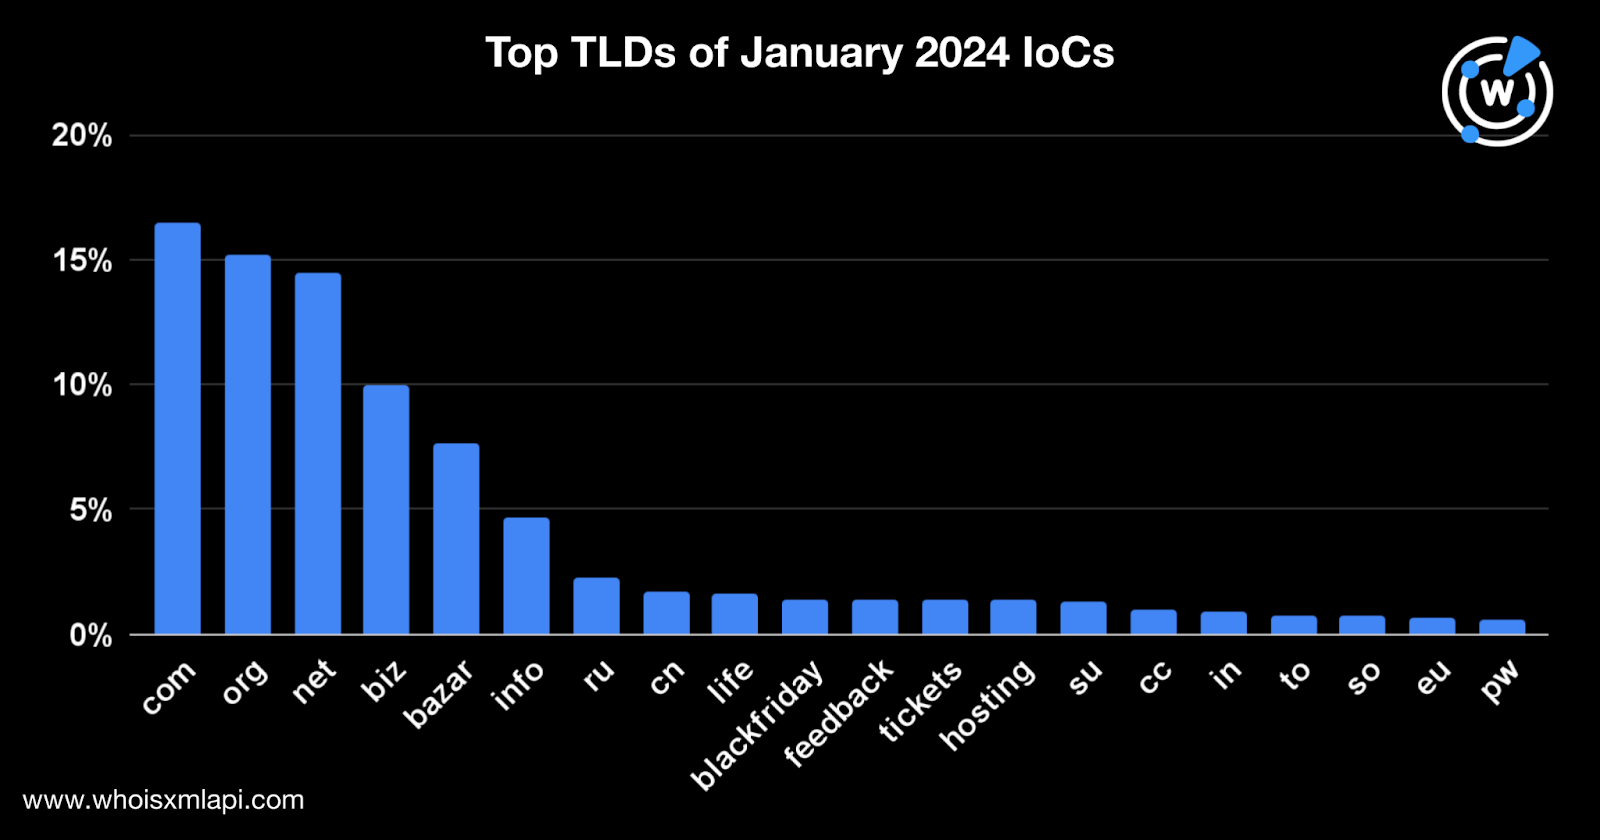 Top TLDs of January 2024 IoCs